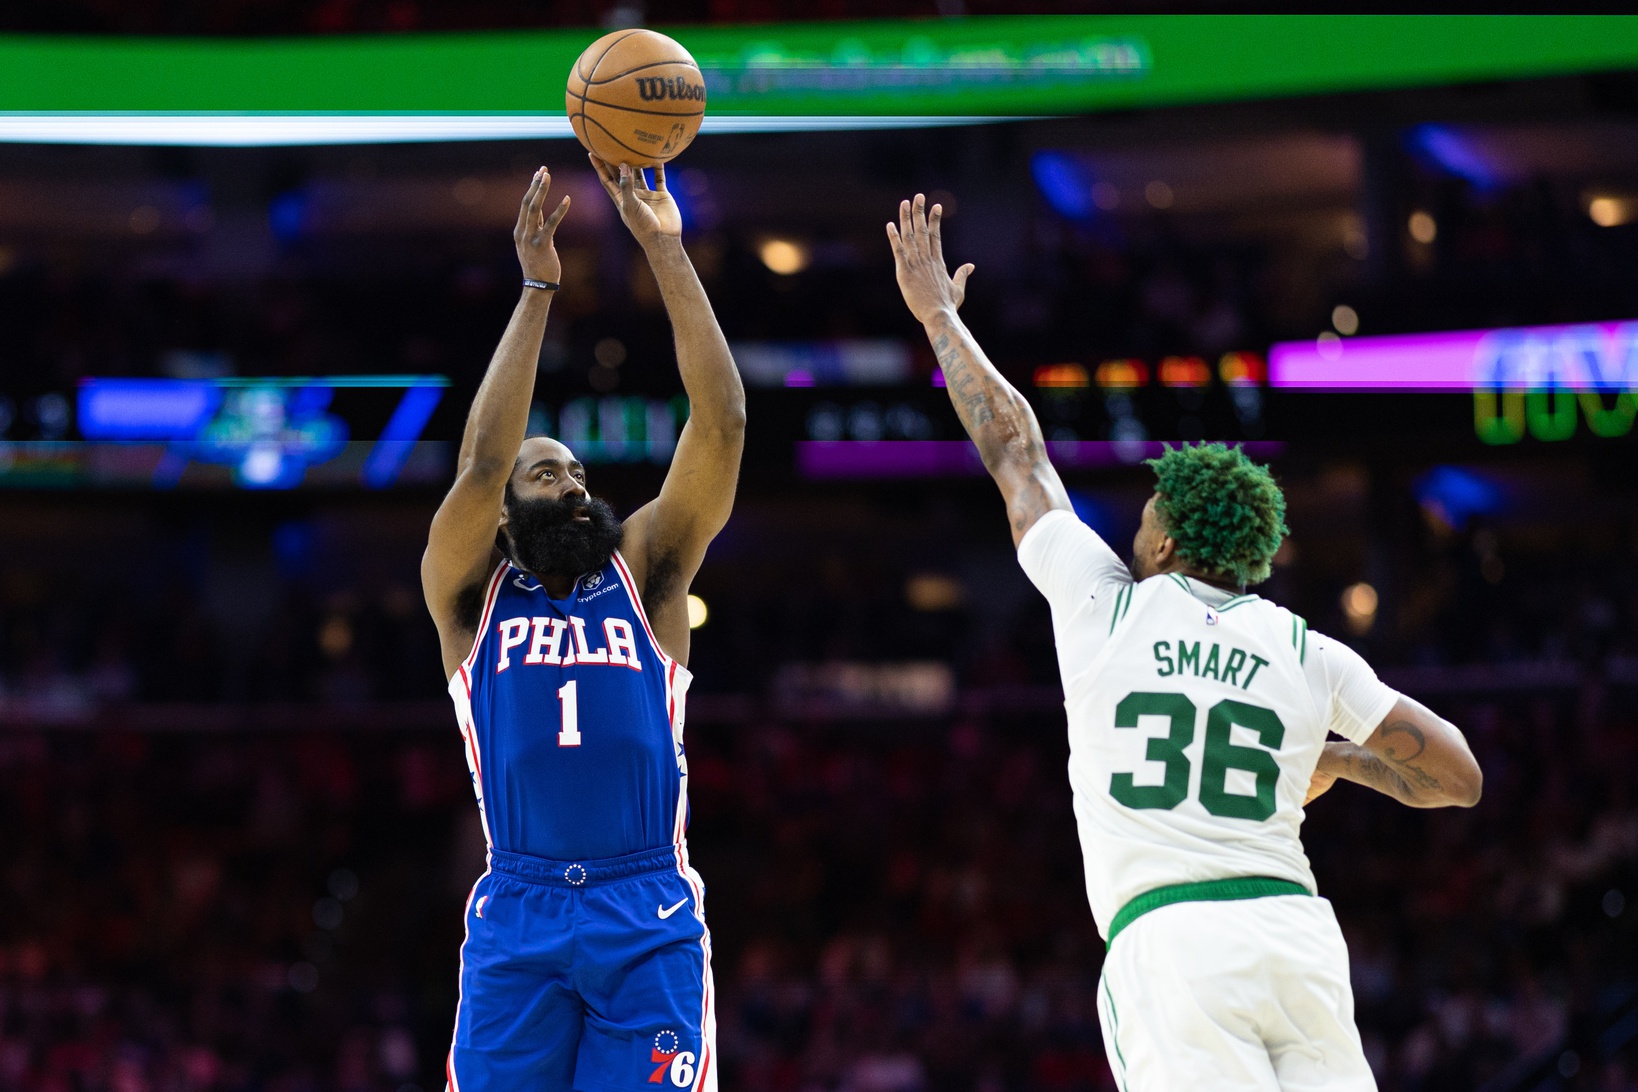 May 11, 2023; Philadelphia, Pennsylvania, USA; Philadelphia 76ers guard James Harden (1) shoots past Boston Celtics guard Marcus Smart (36) during the second quarter in game six of the 2023 NBA playoffs at Wells Fargo Center. Mandatory Credit: Bill Streicher-USA TODAY Sports